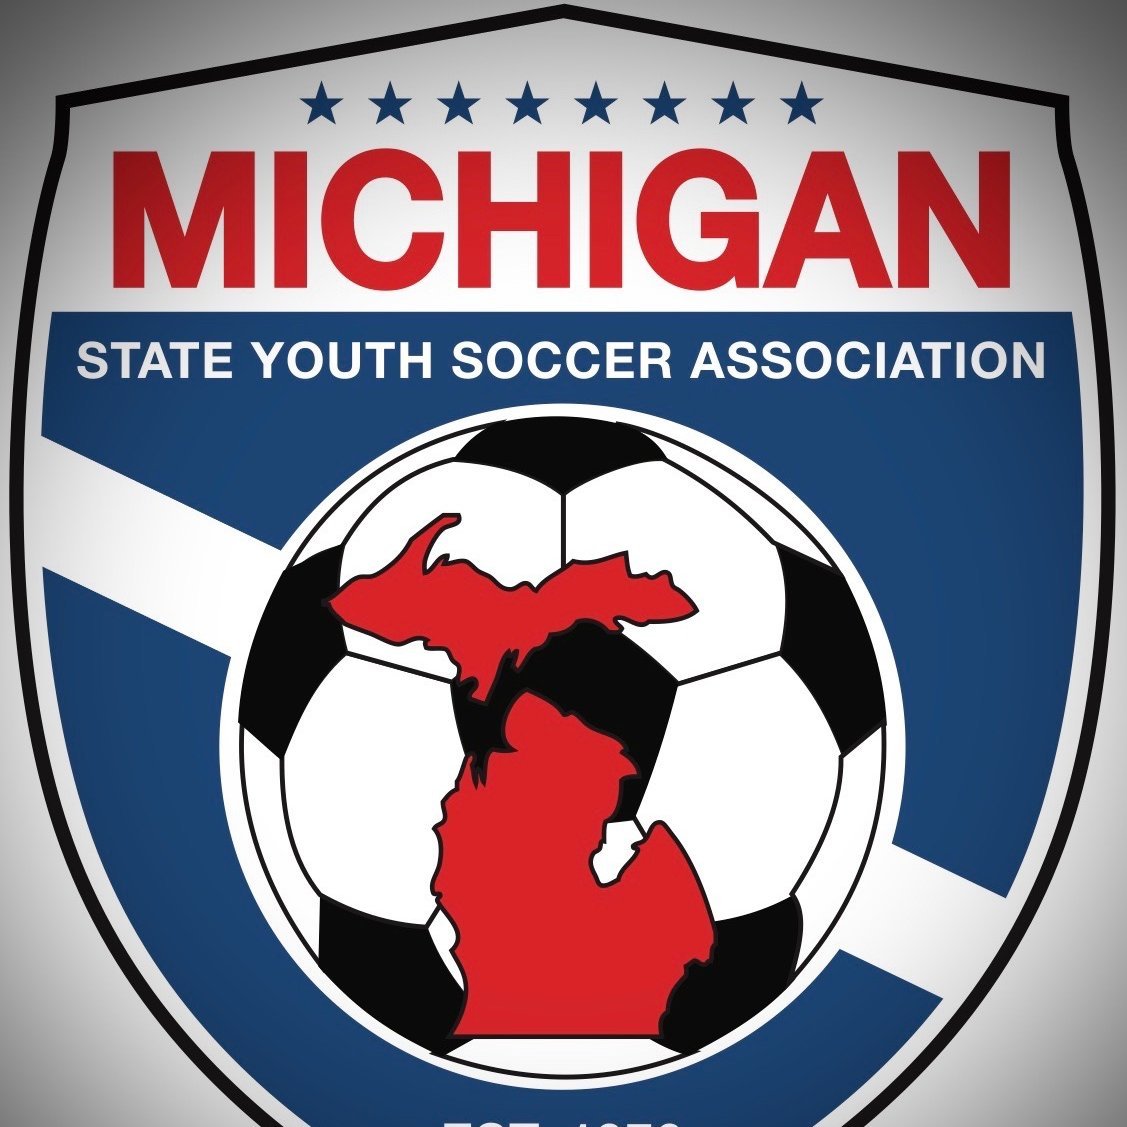 The MSYSA Mission: Michigan State Youth Soccer Association is dedicated to excellence in leading, educating and serving the soccer community.